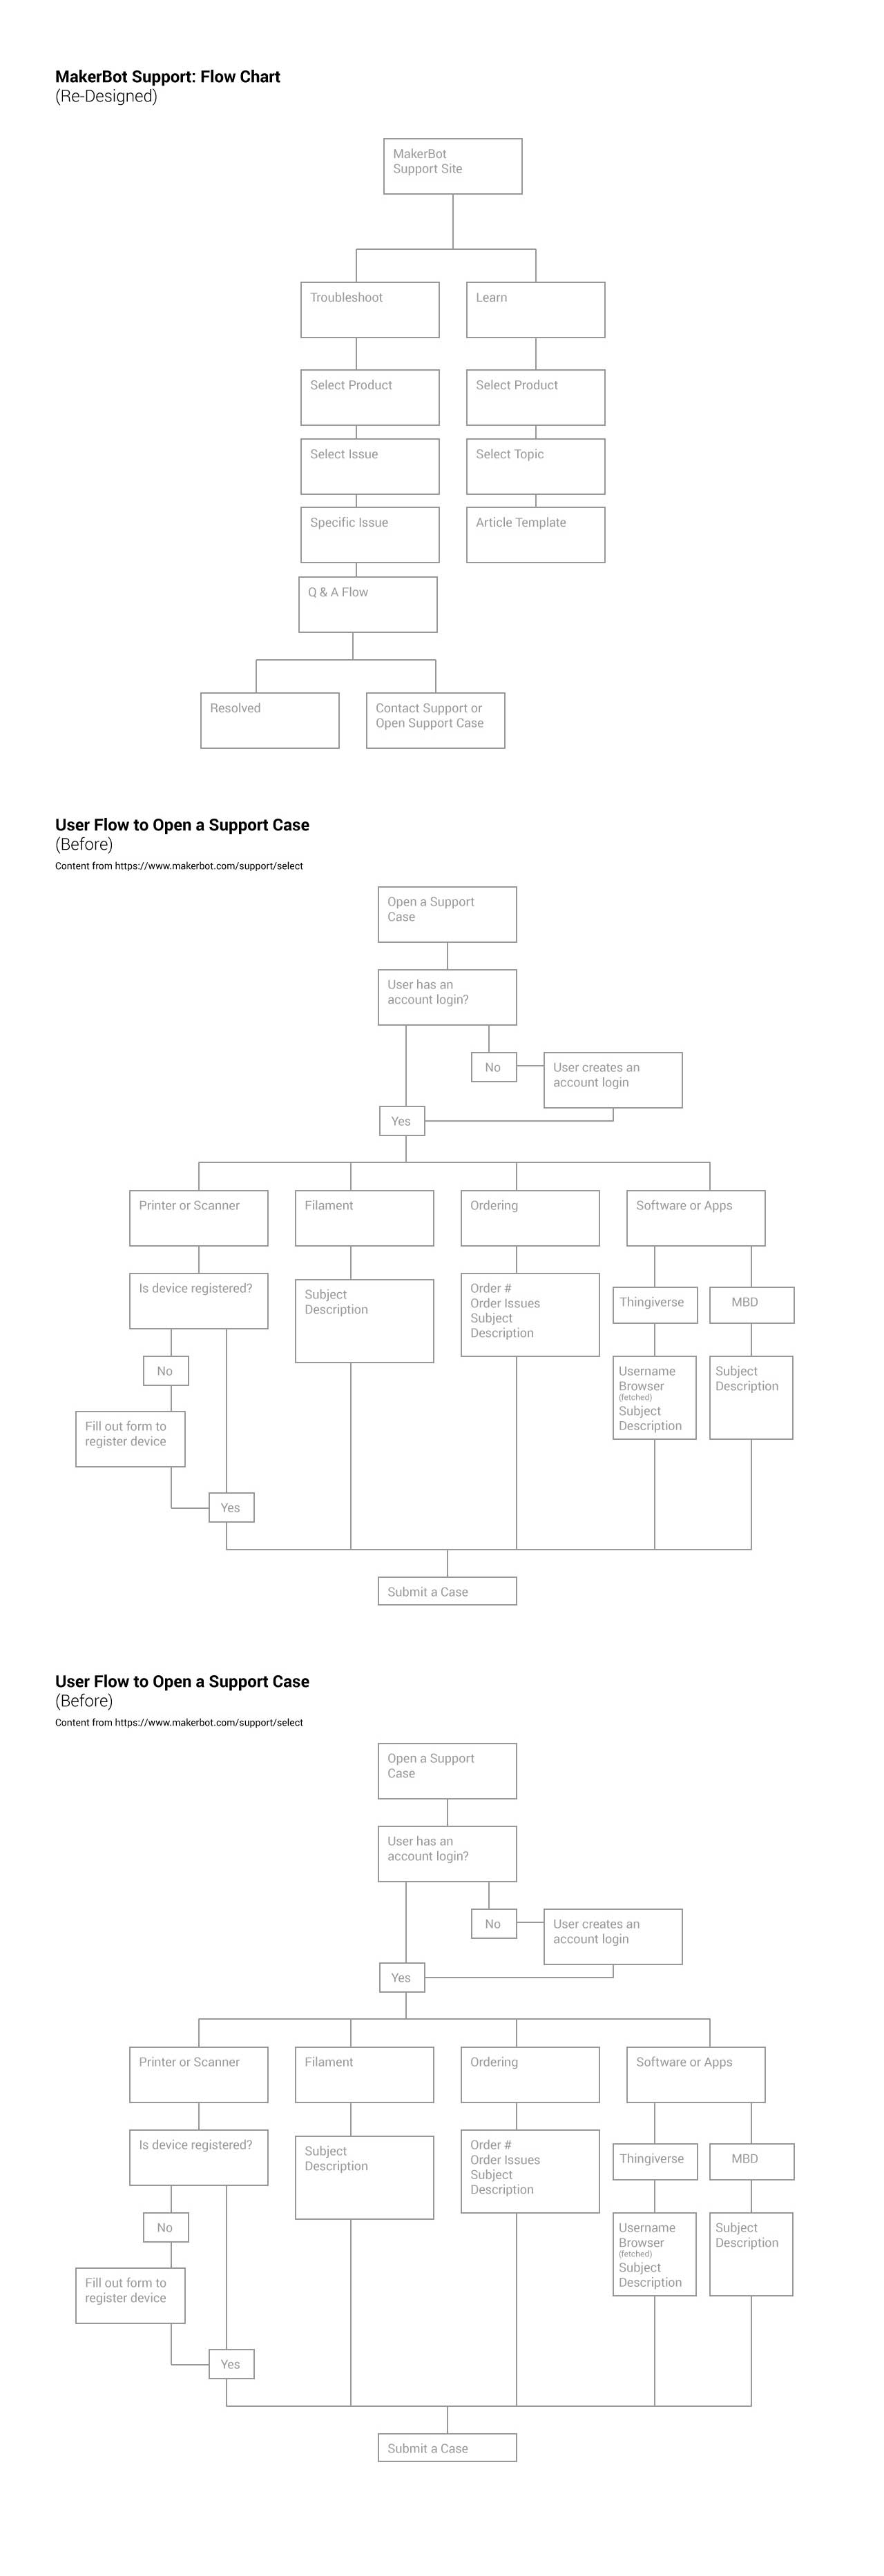 Flow Diagram of MakerBot's Support Portal Redesign